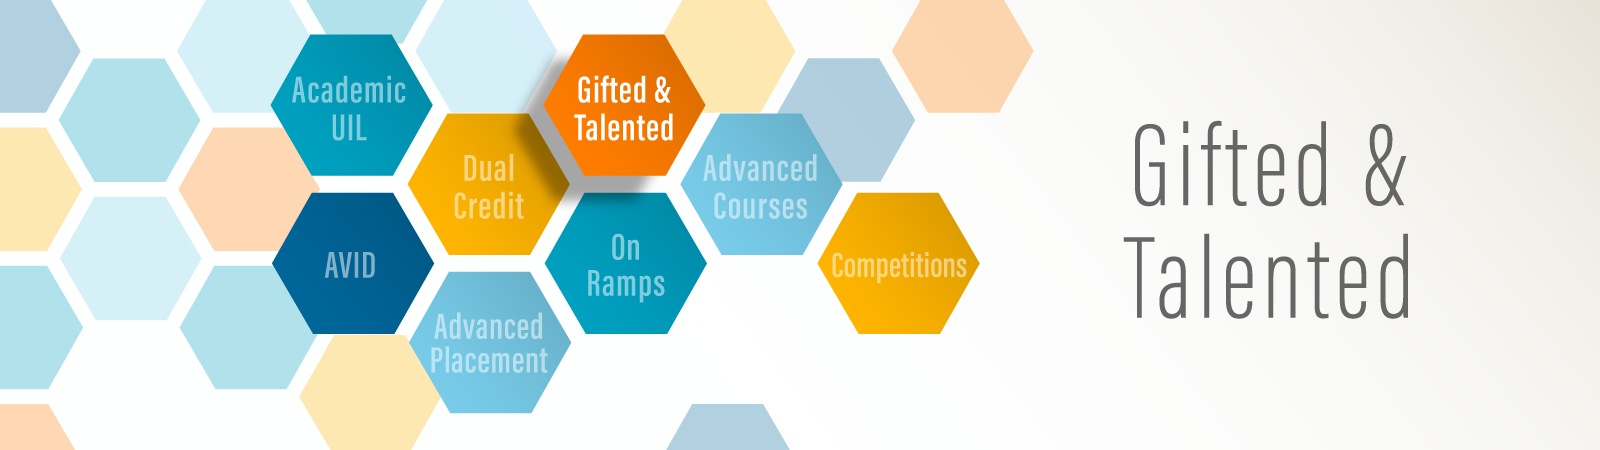 Gifted and talented, Academic UIL, Avid, dual credit, advanced placement, On ramps, advanced courses, competitions